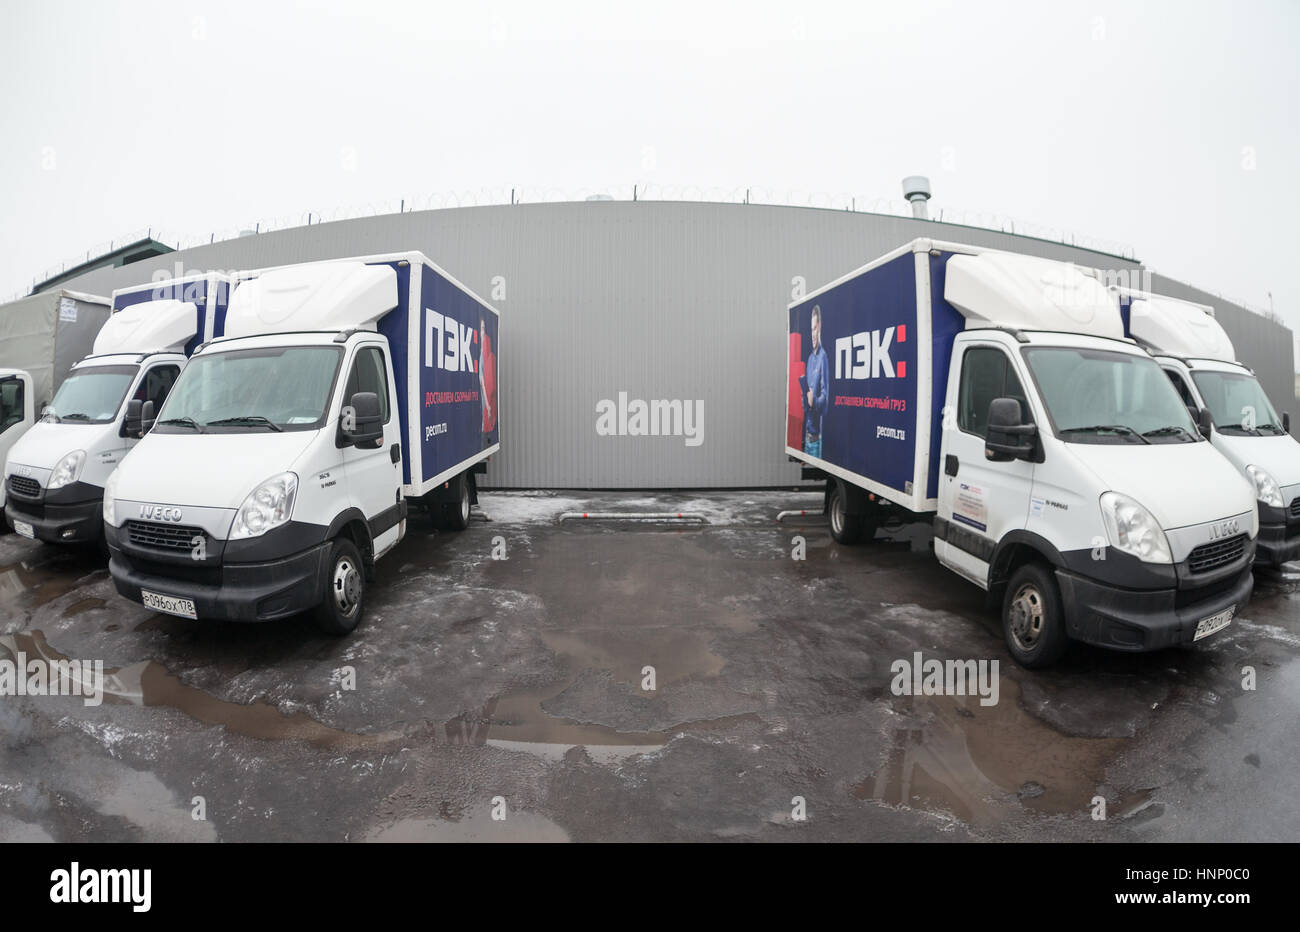 ST. PETERSBURG, RUSSIA - CIRCA JAN, 2016: Small lorries parking lot with empty place. Russian transportation company PEC (First expedition company) is Stock Photo